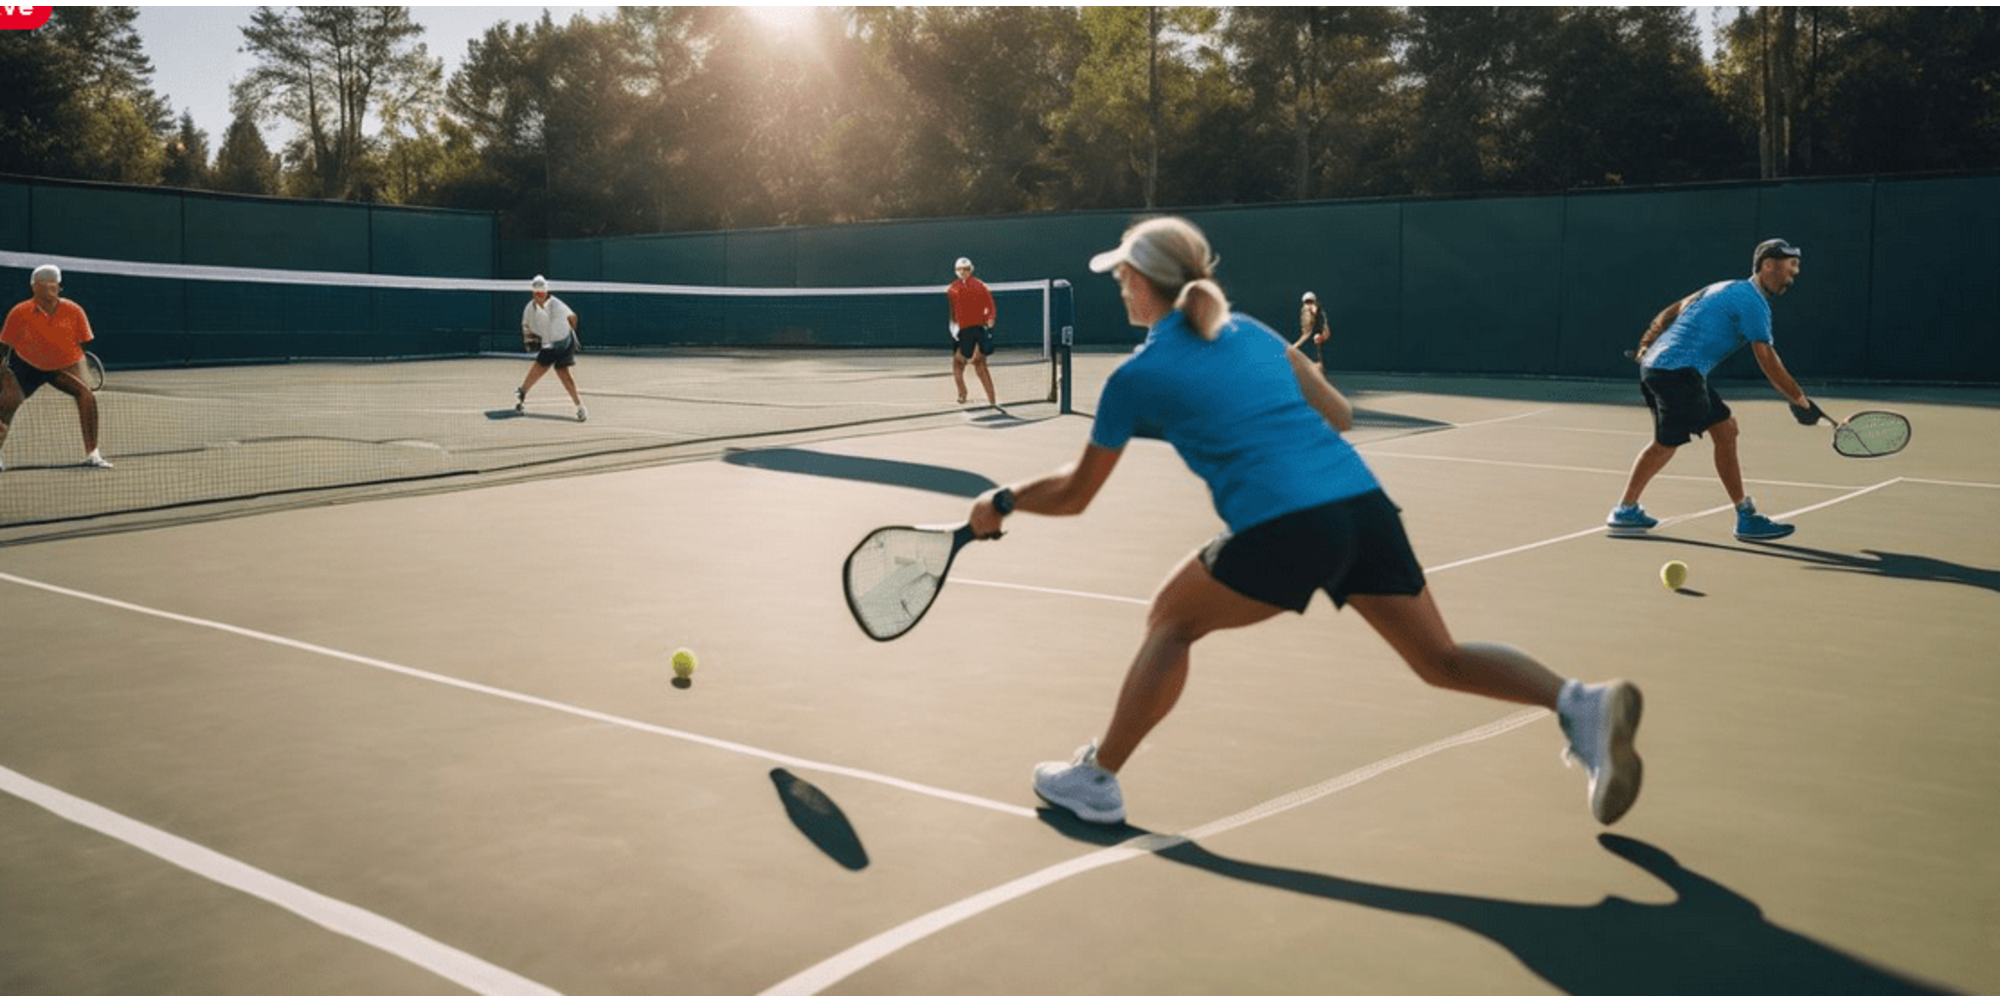 "Pickleball 101: A Beginner's Guide to the Sport"